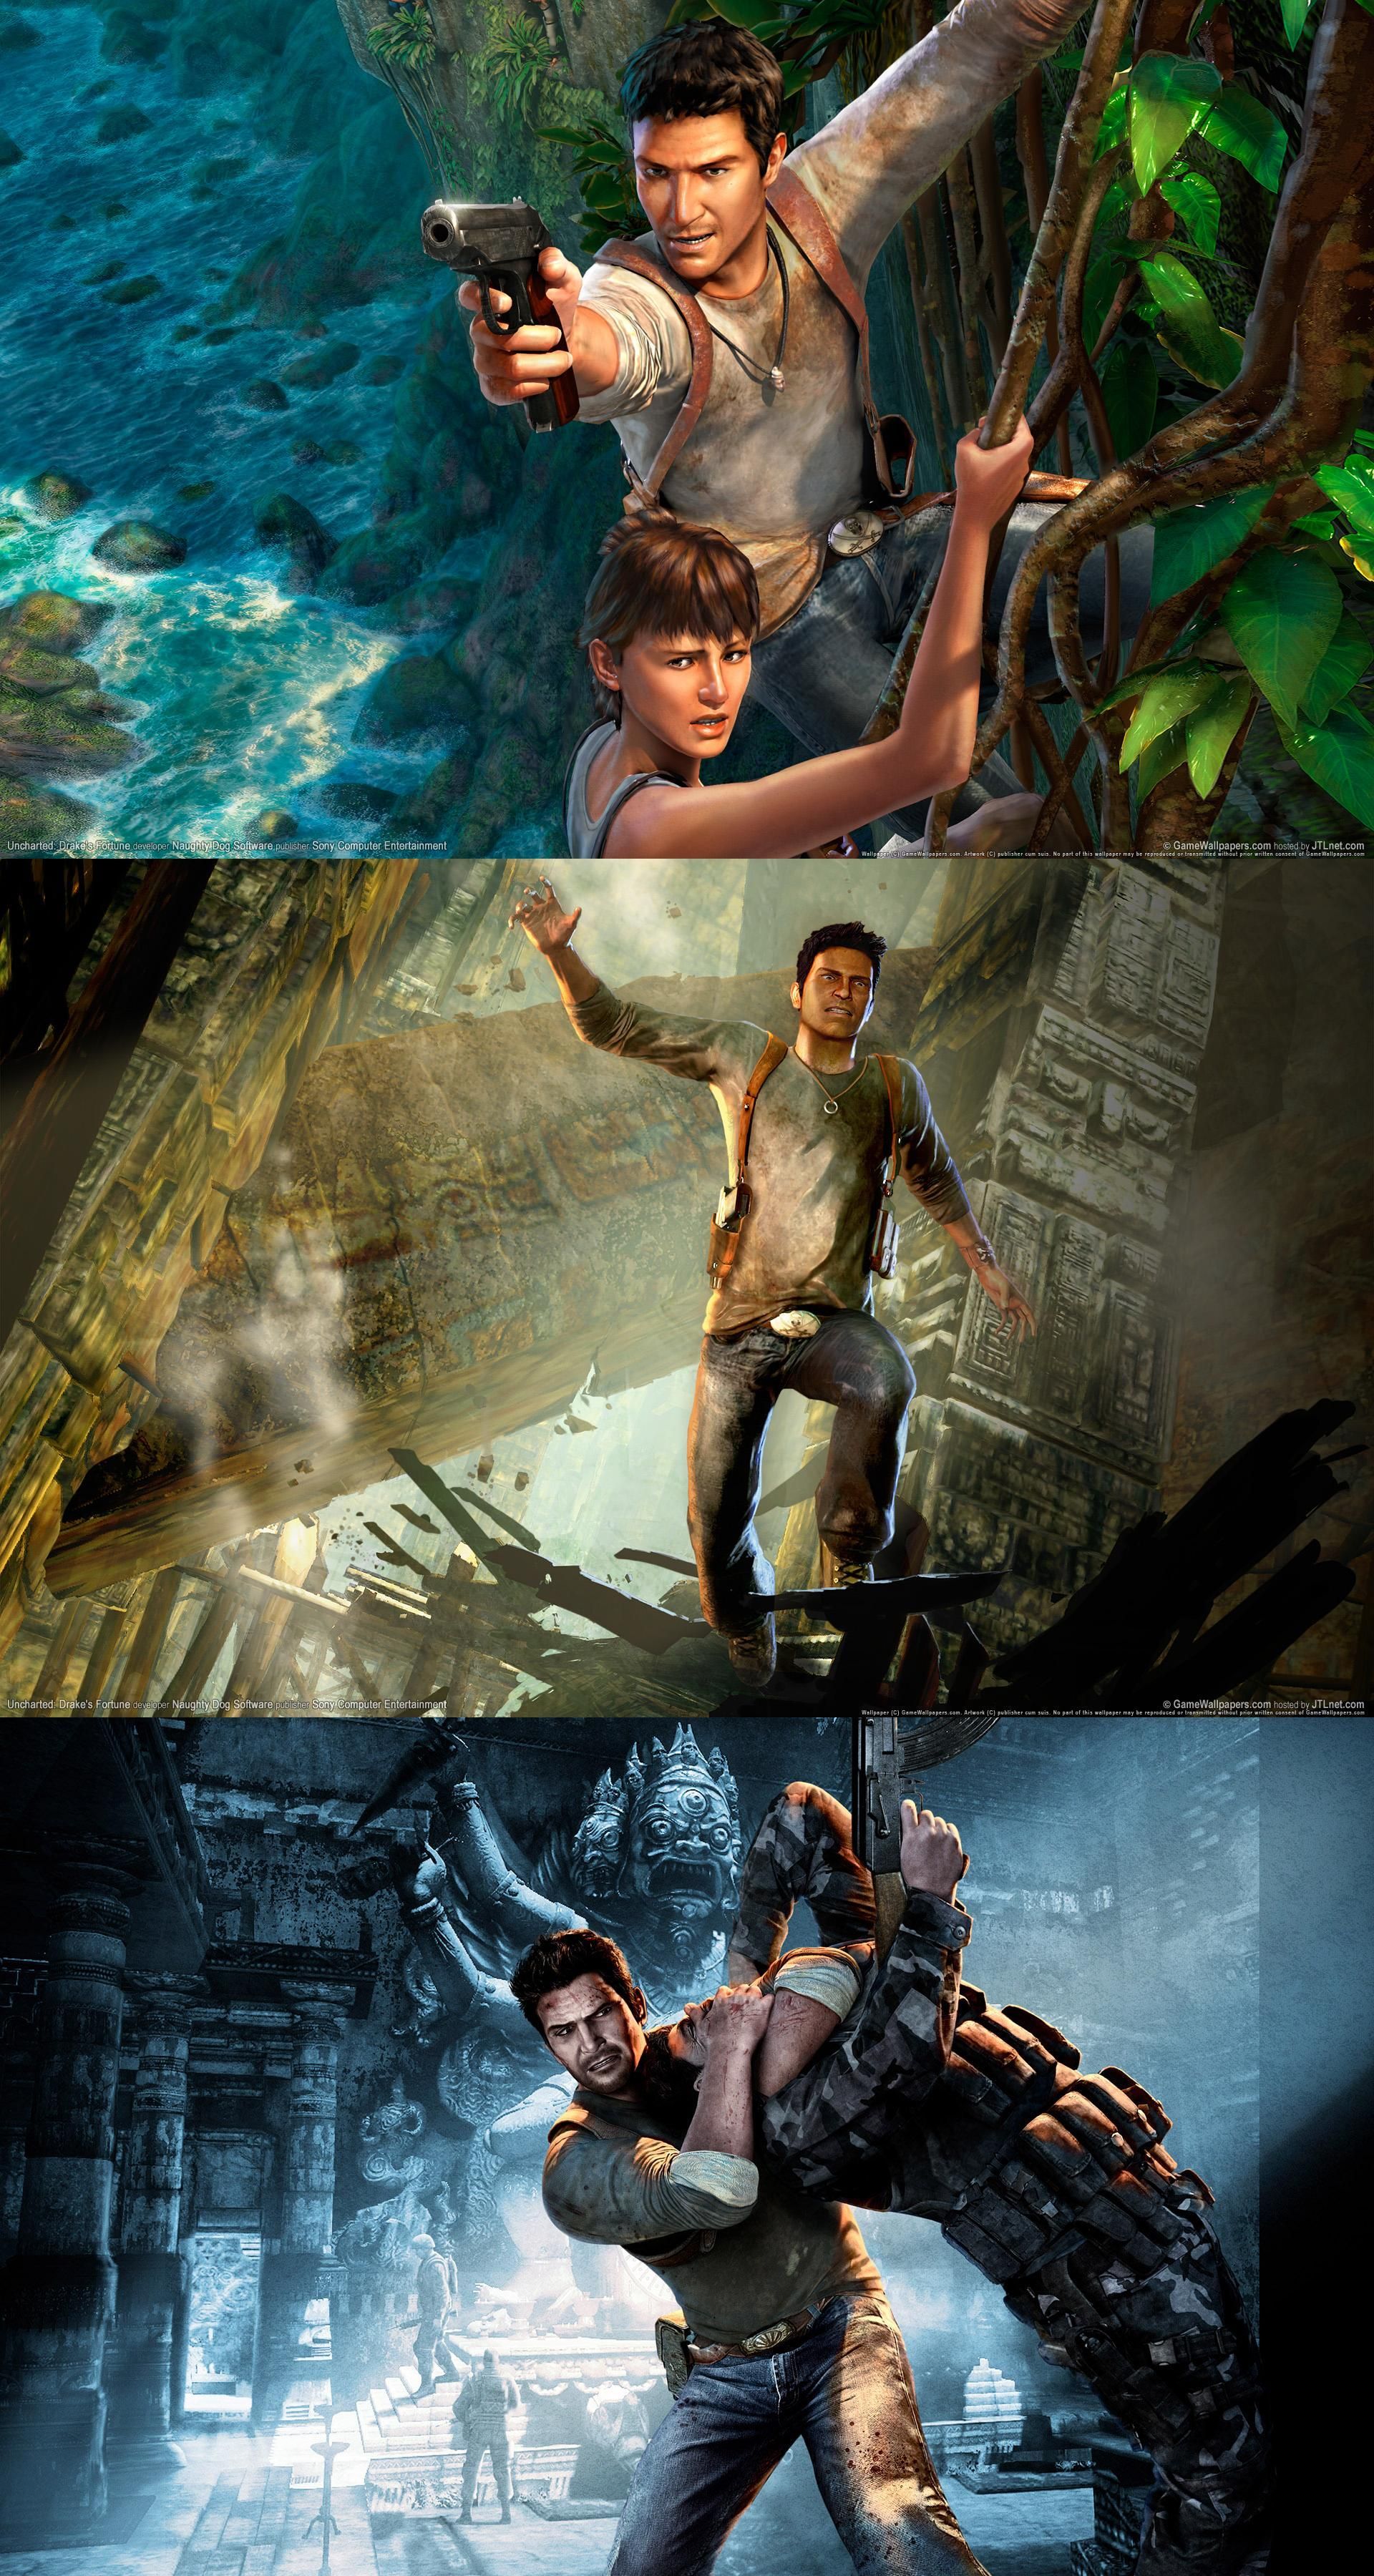 uncharted 1 pc version